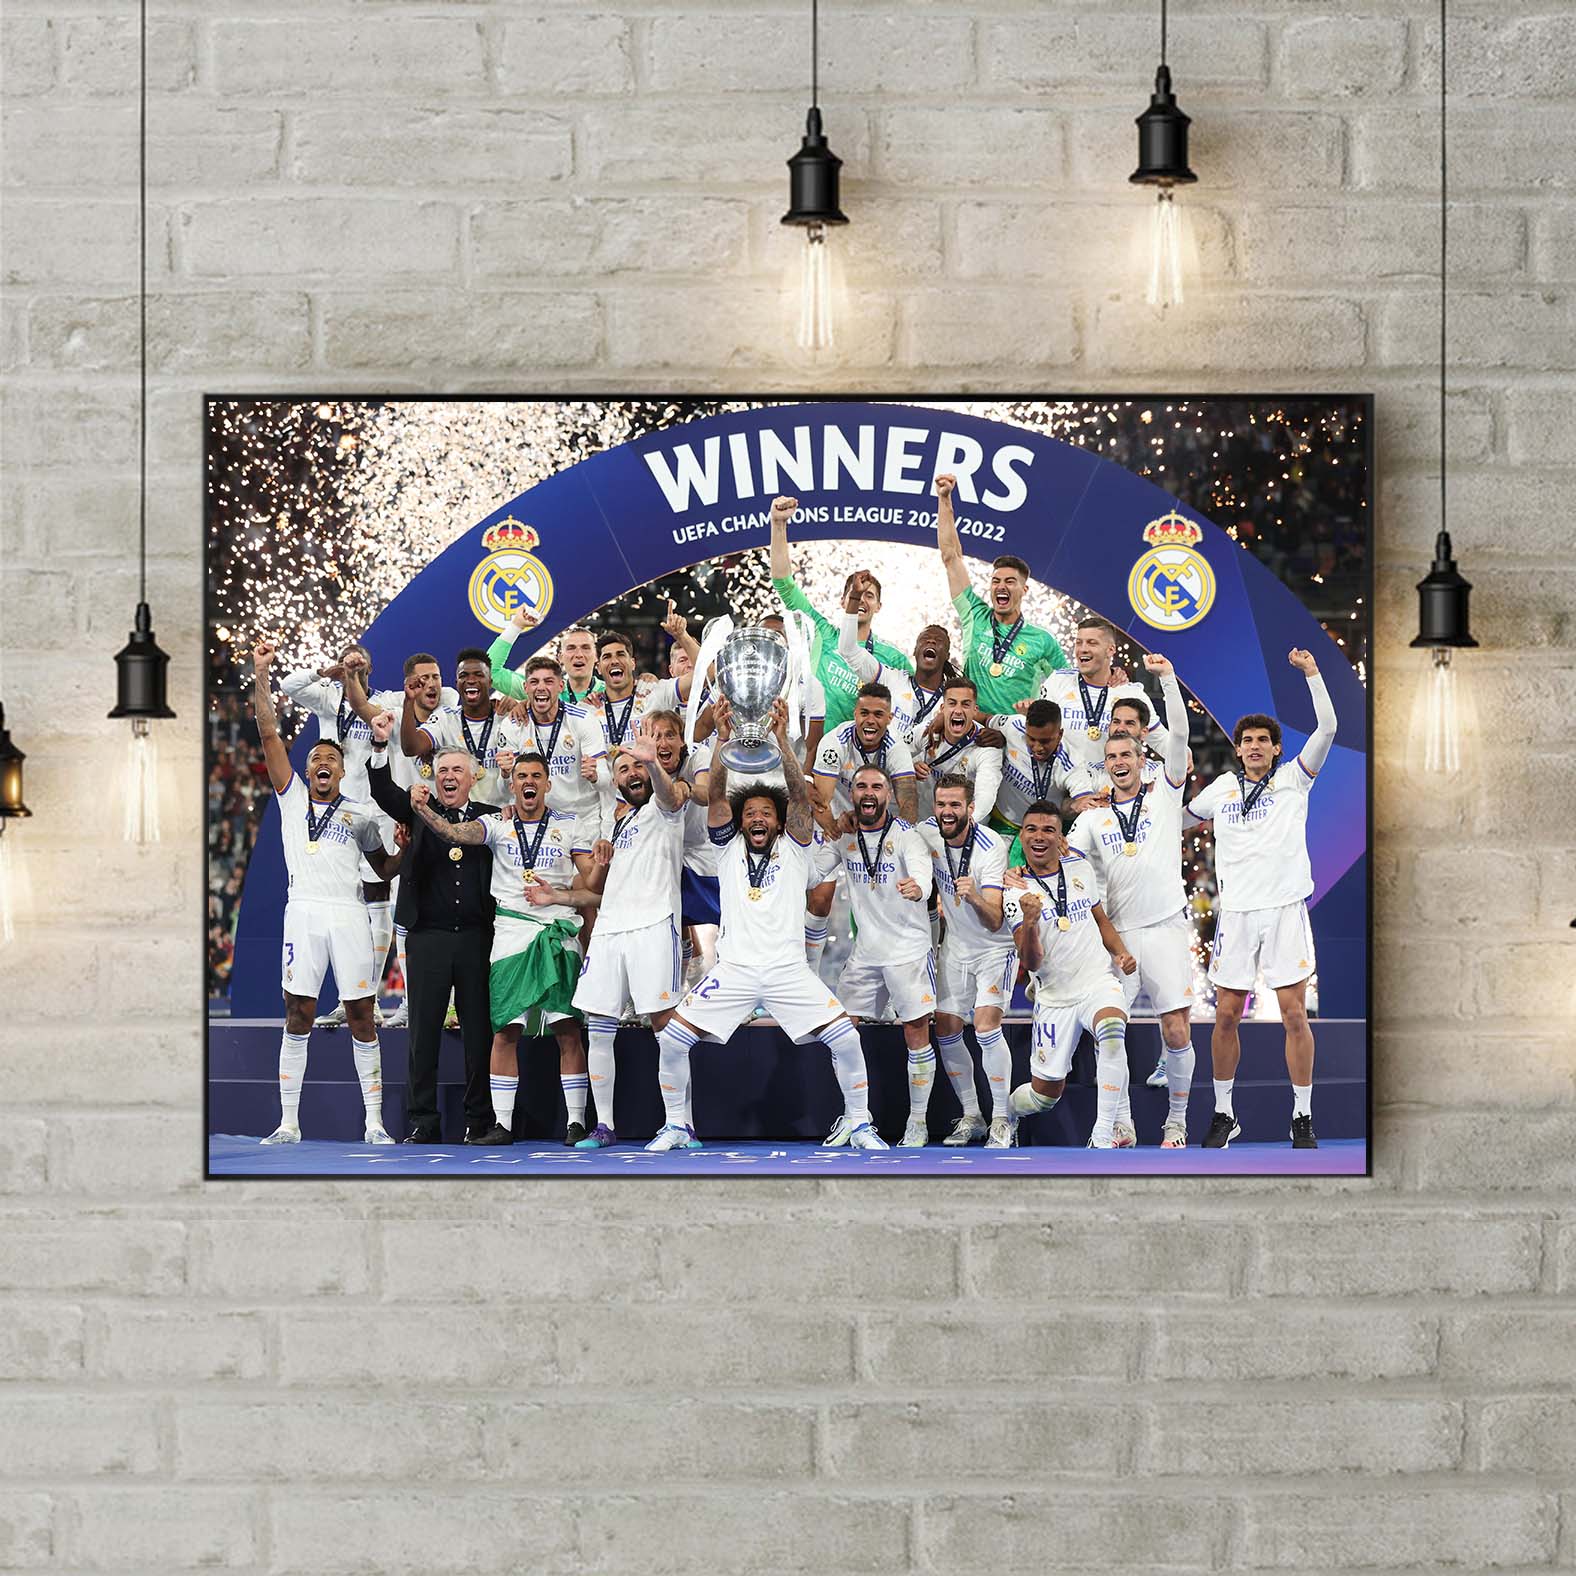 Real Madrid King of Europe 14 Champions League UCL Final Wall Decor Poster Canvas